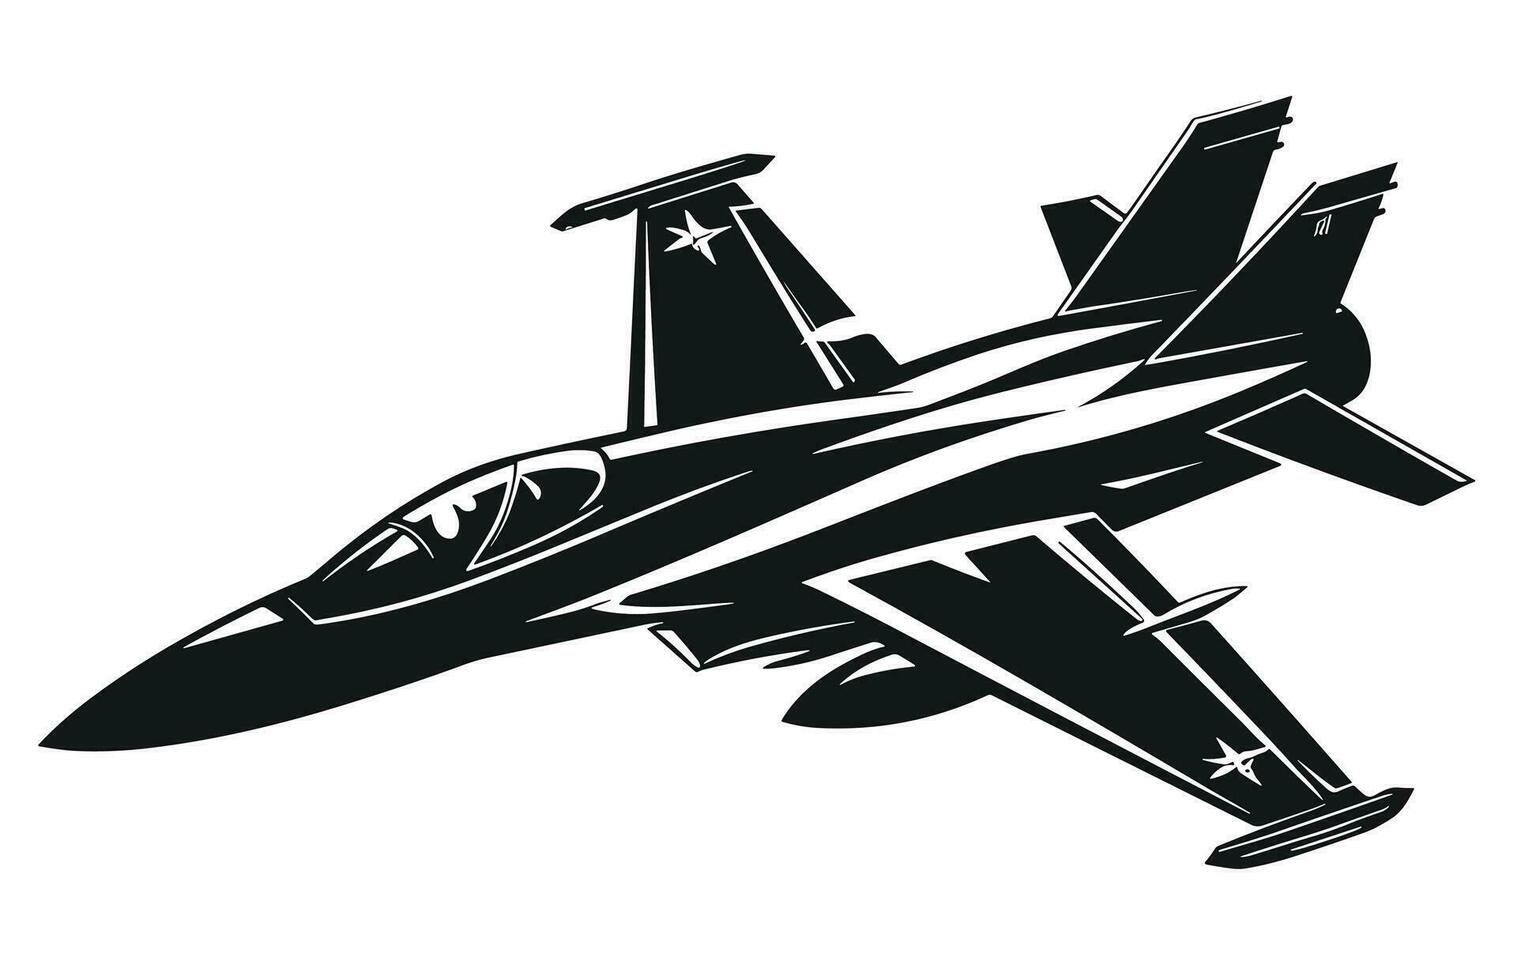 fighter jet silhouette. Jet Fighter Airplane Silhouette. vector